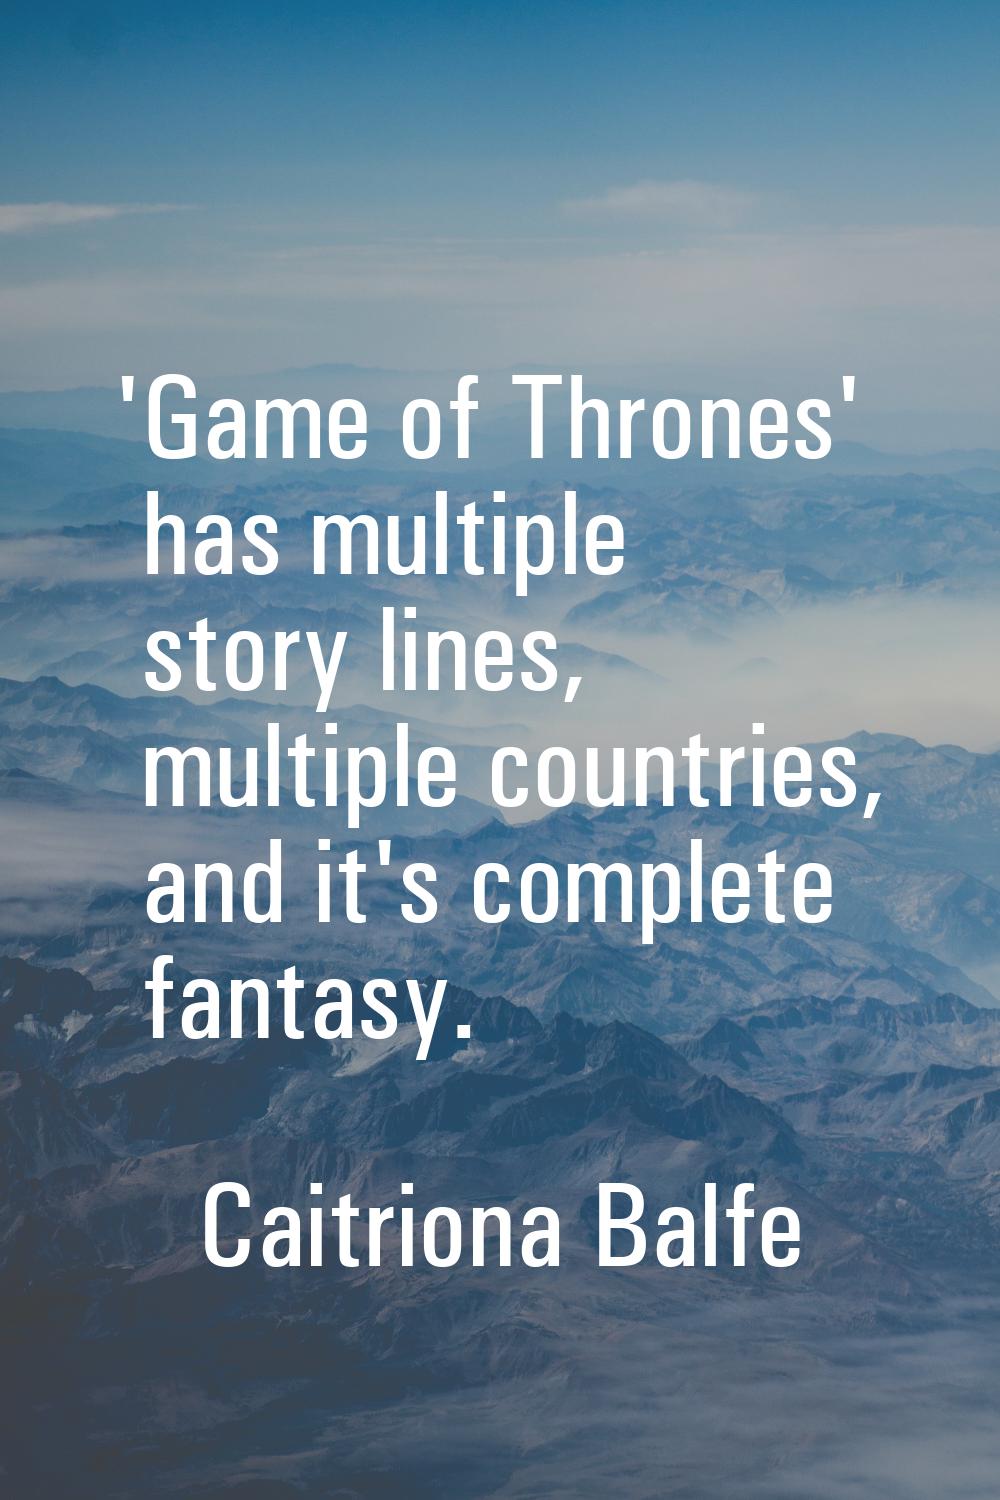 'Game of Thrones' has multiple story lines, multiple countries, and it's complete fantasy.